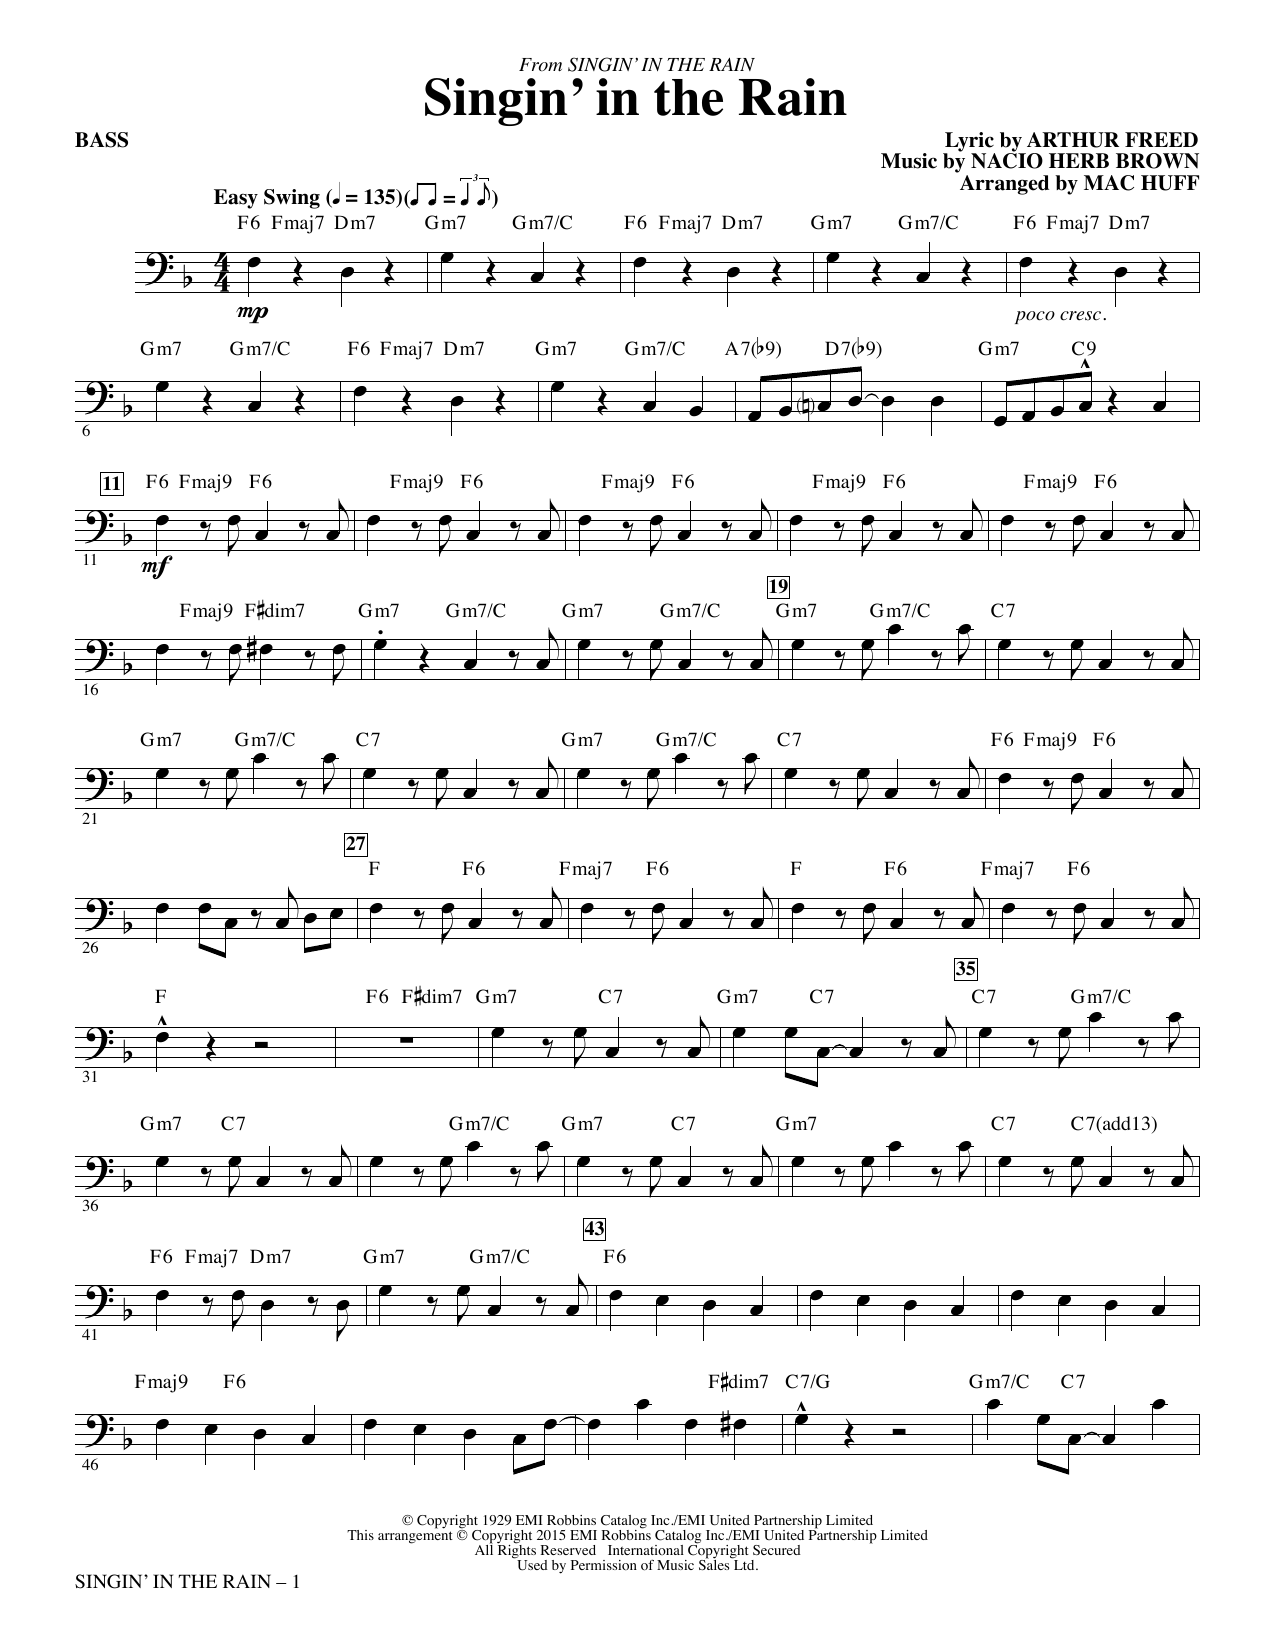 Gene Kelly Singin' in the Rain (arr. Mac Huff) - Bass sheet music notes and chords. Download Printable PDF.